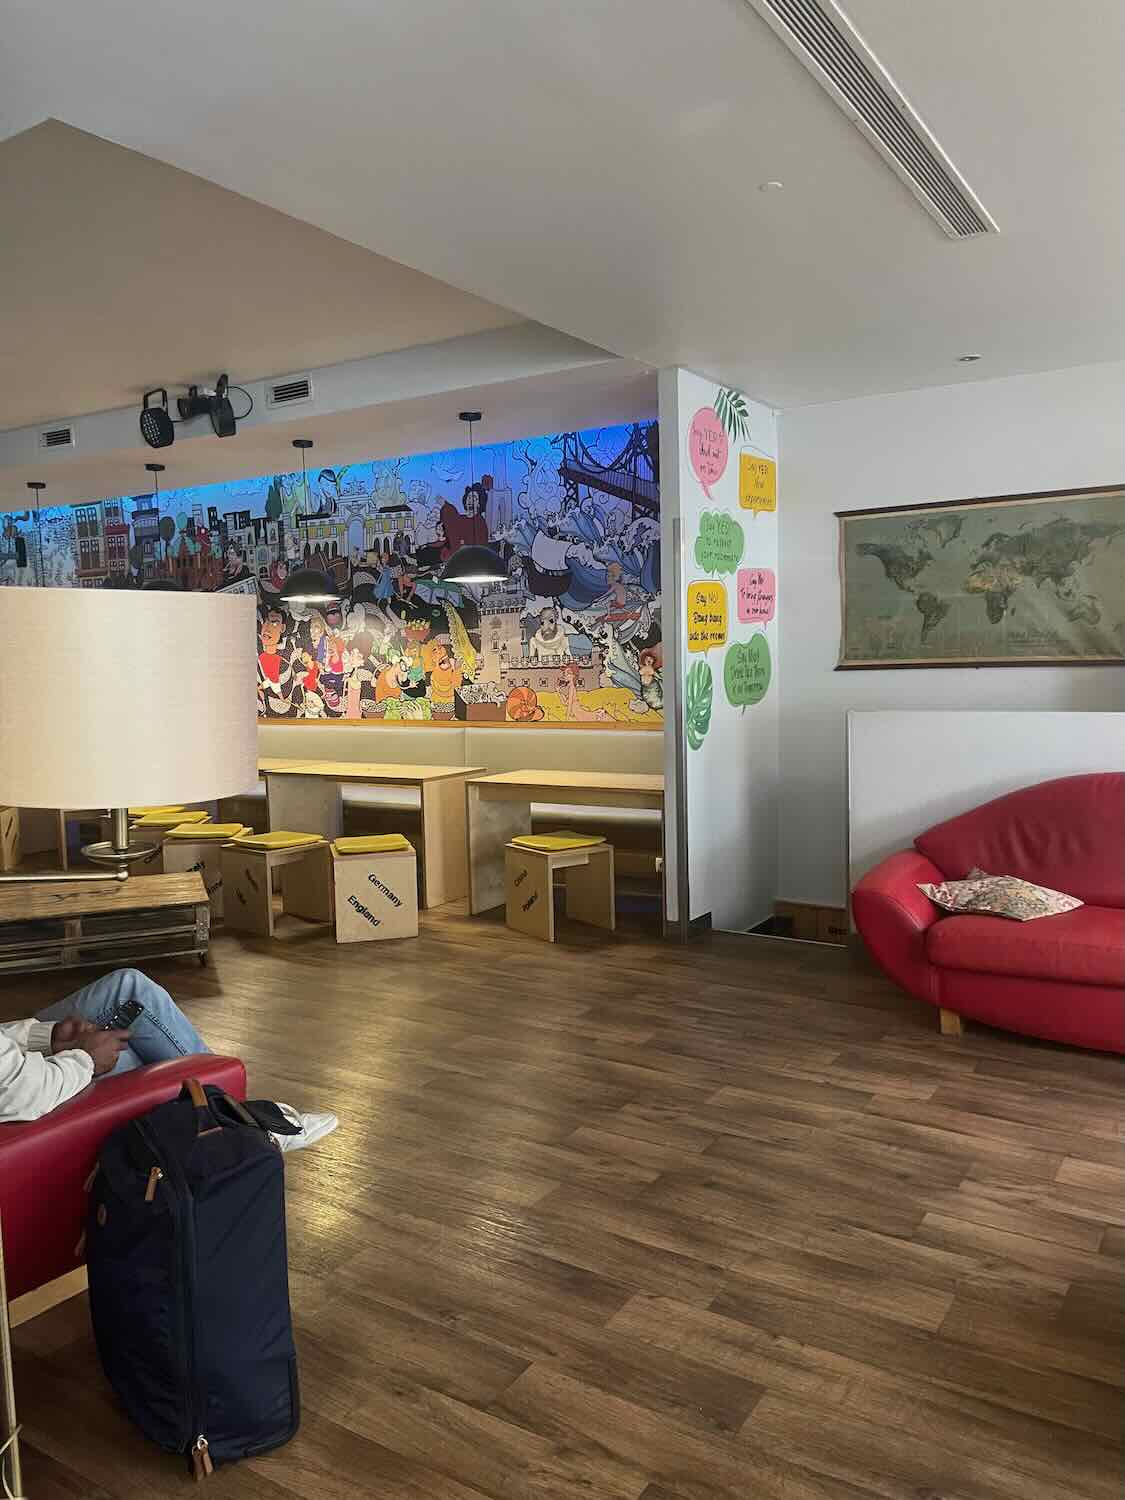 A cozy common area inside a Lisbon hostel, with a traveler resting on a red sofa, and a vibrant wall mural showcasing the city's landmarks